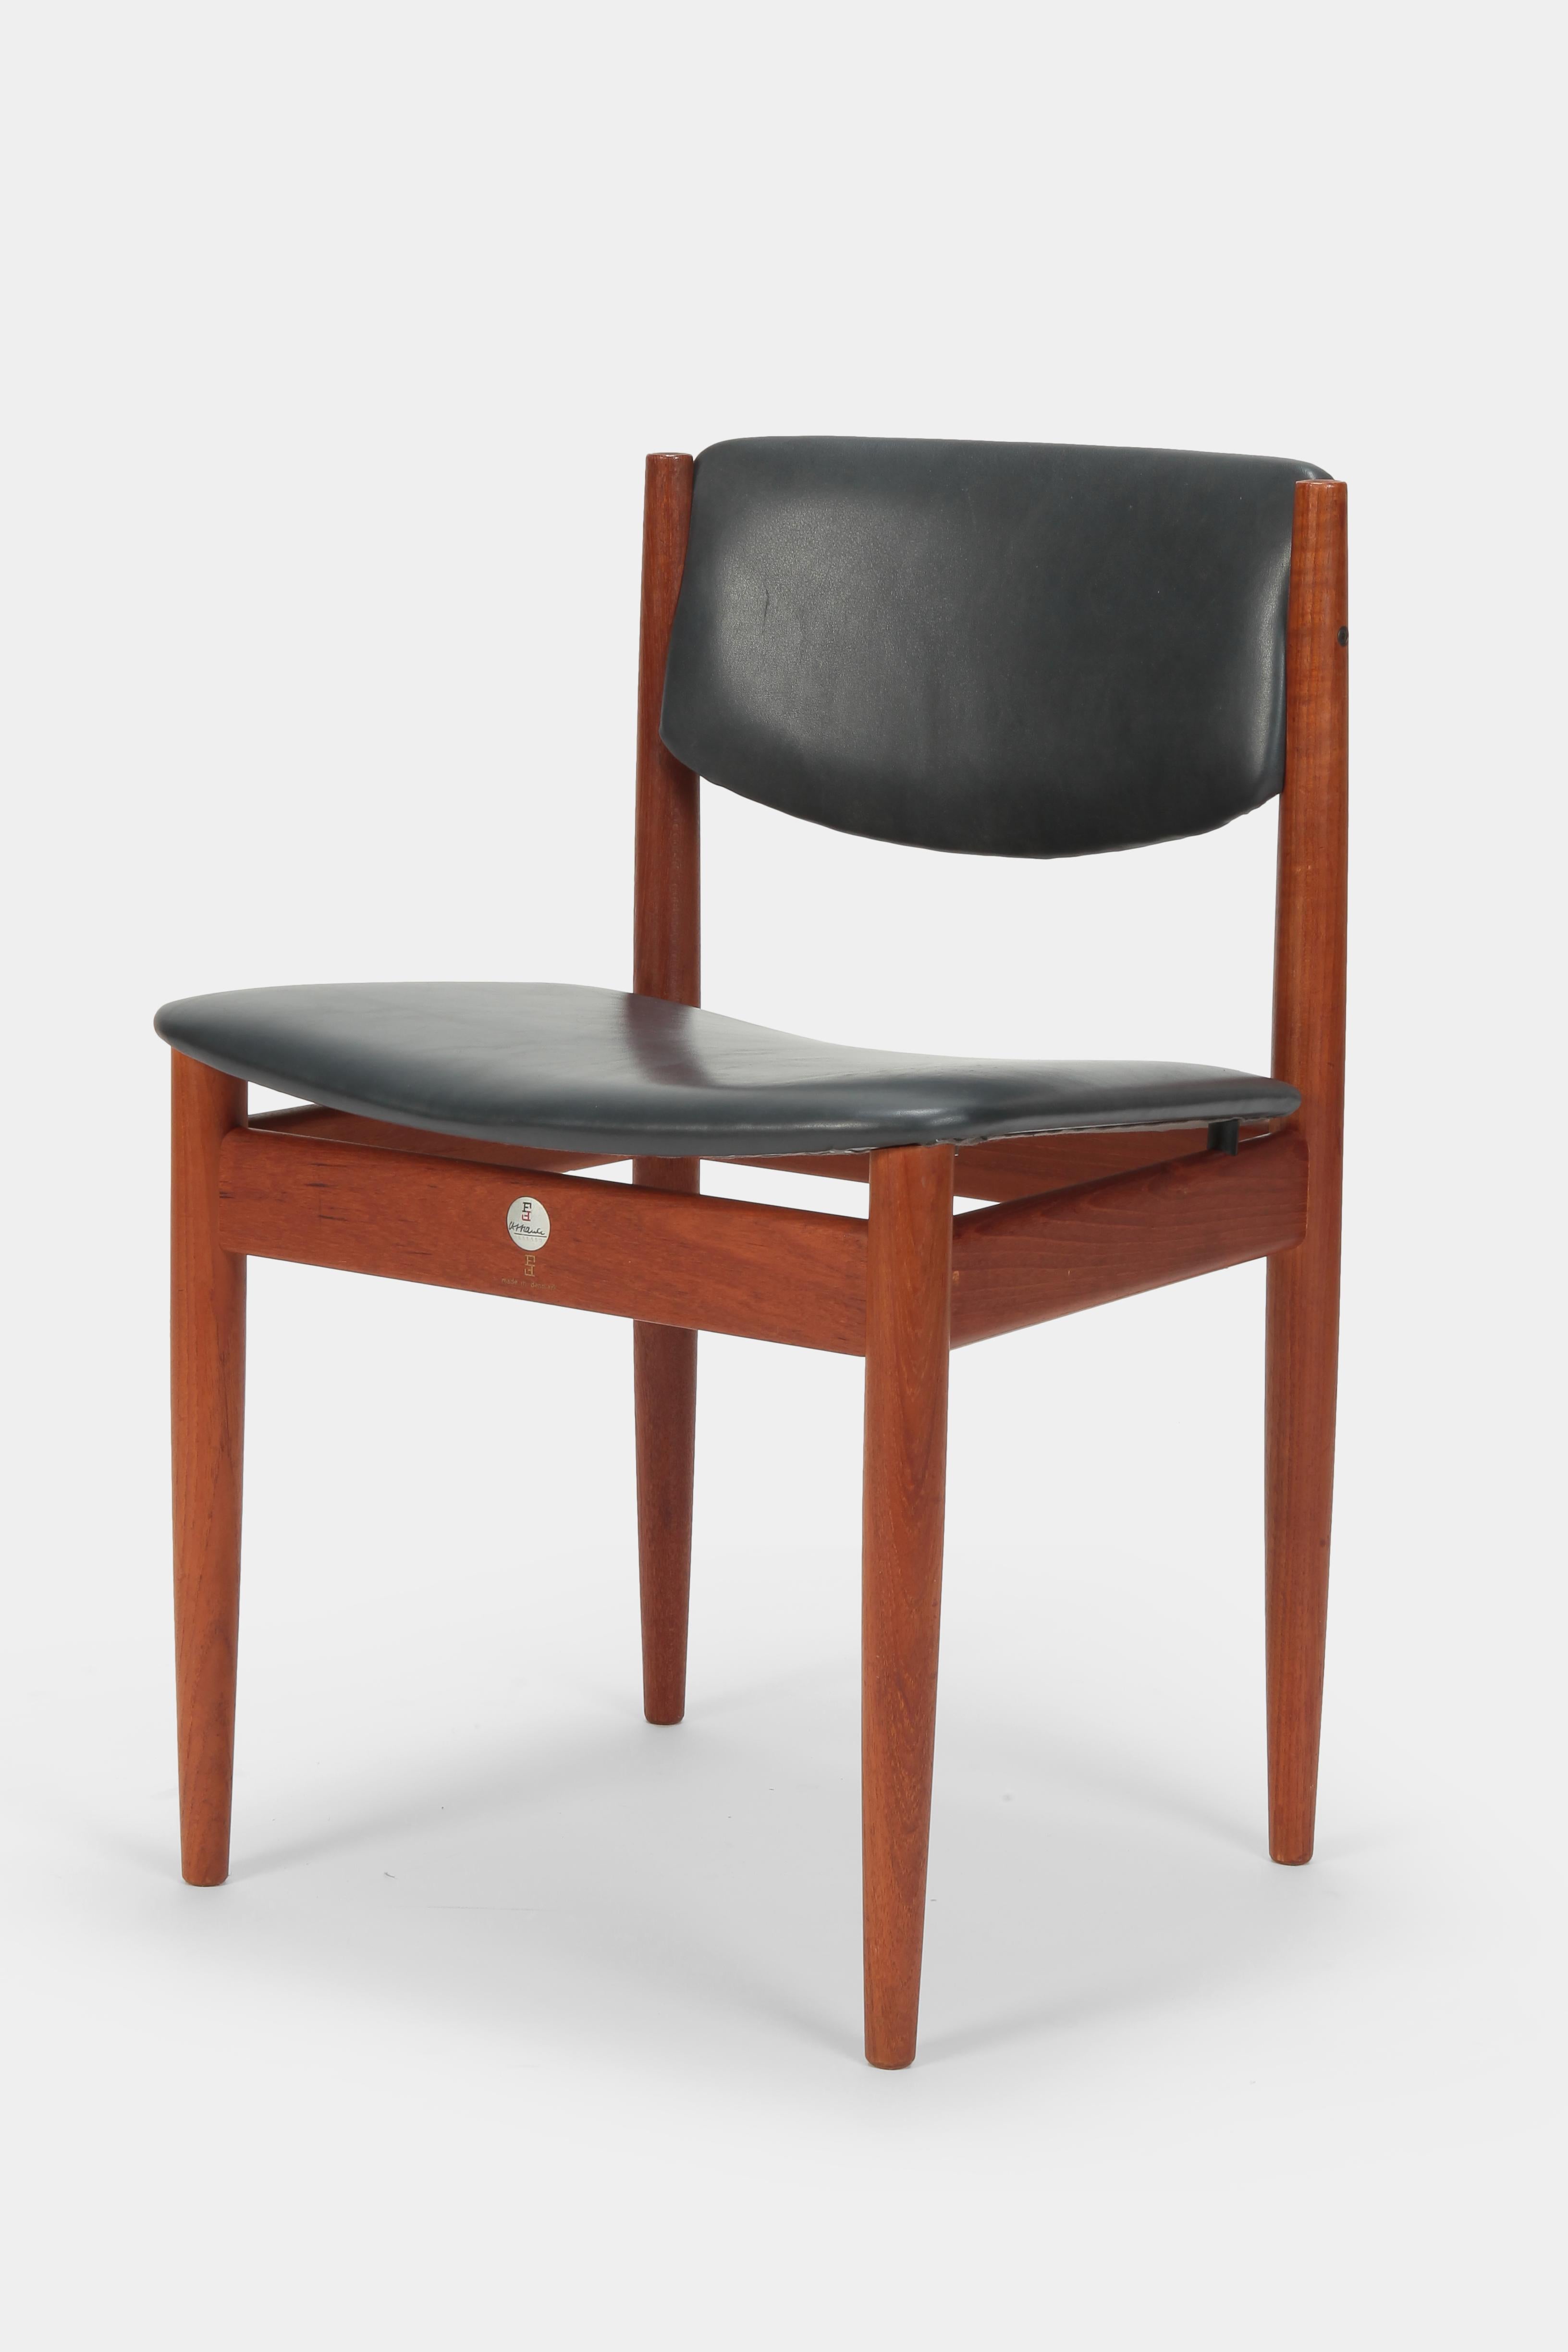 Pair Finn Juhl Model 197 Chairs Leather Teak, 1960s In Good Condition For Sale In Basel, CH